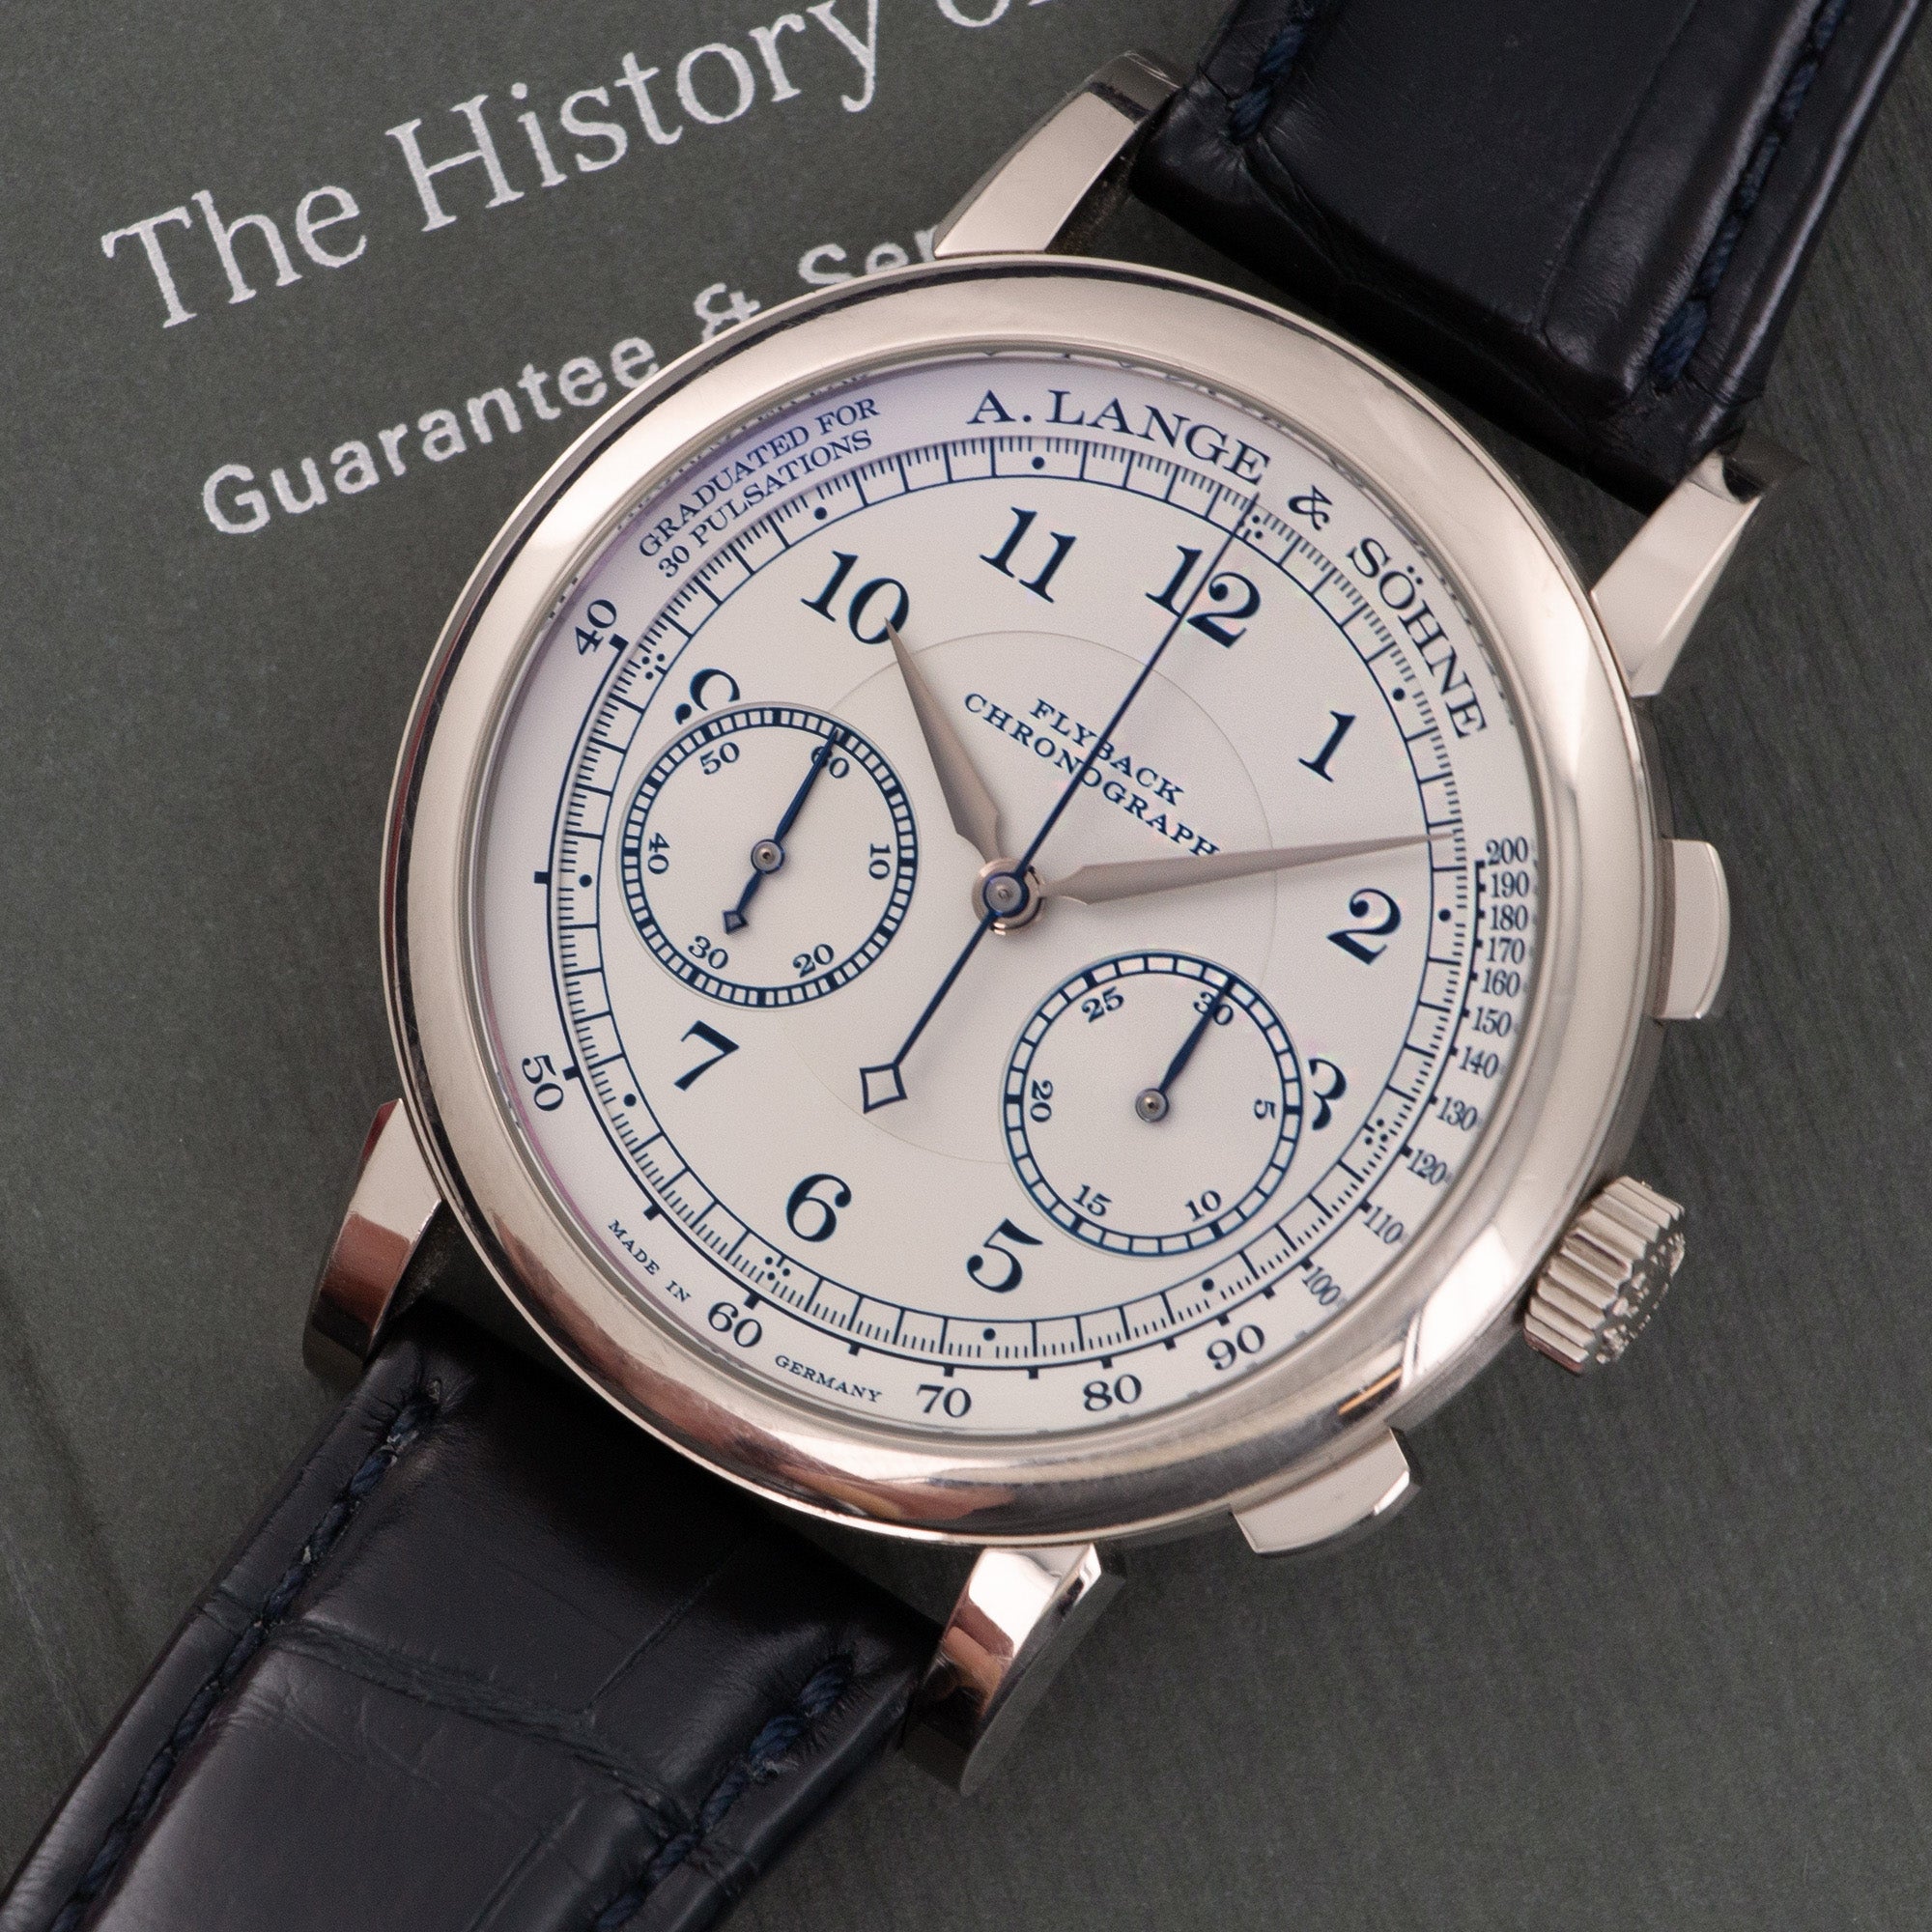 A. Lange &amp; Sohne - A Lange &amp; Sohne White Gold 1815 Chronograph Watch - The Keystone Watches